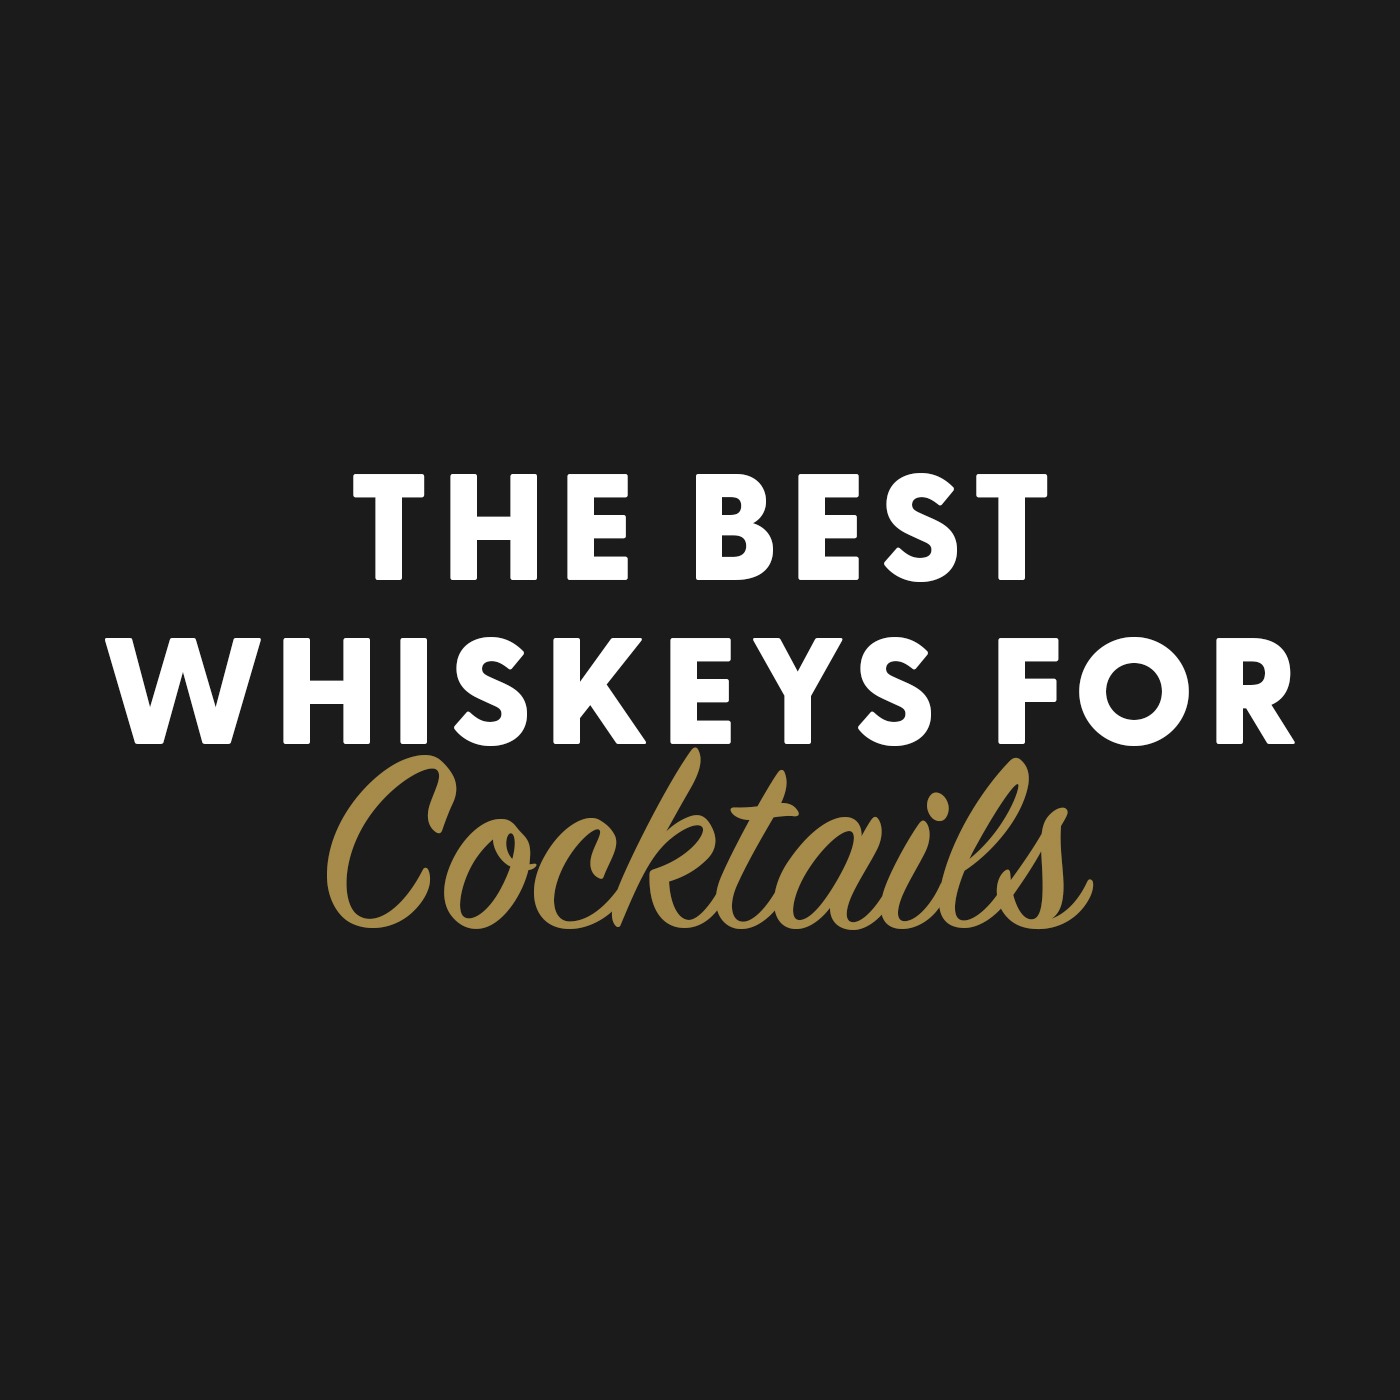 The Best Whiskeys for Cocktails